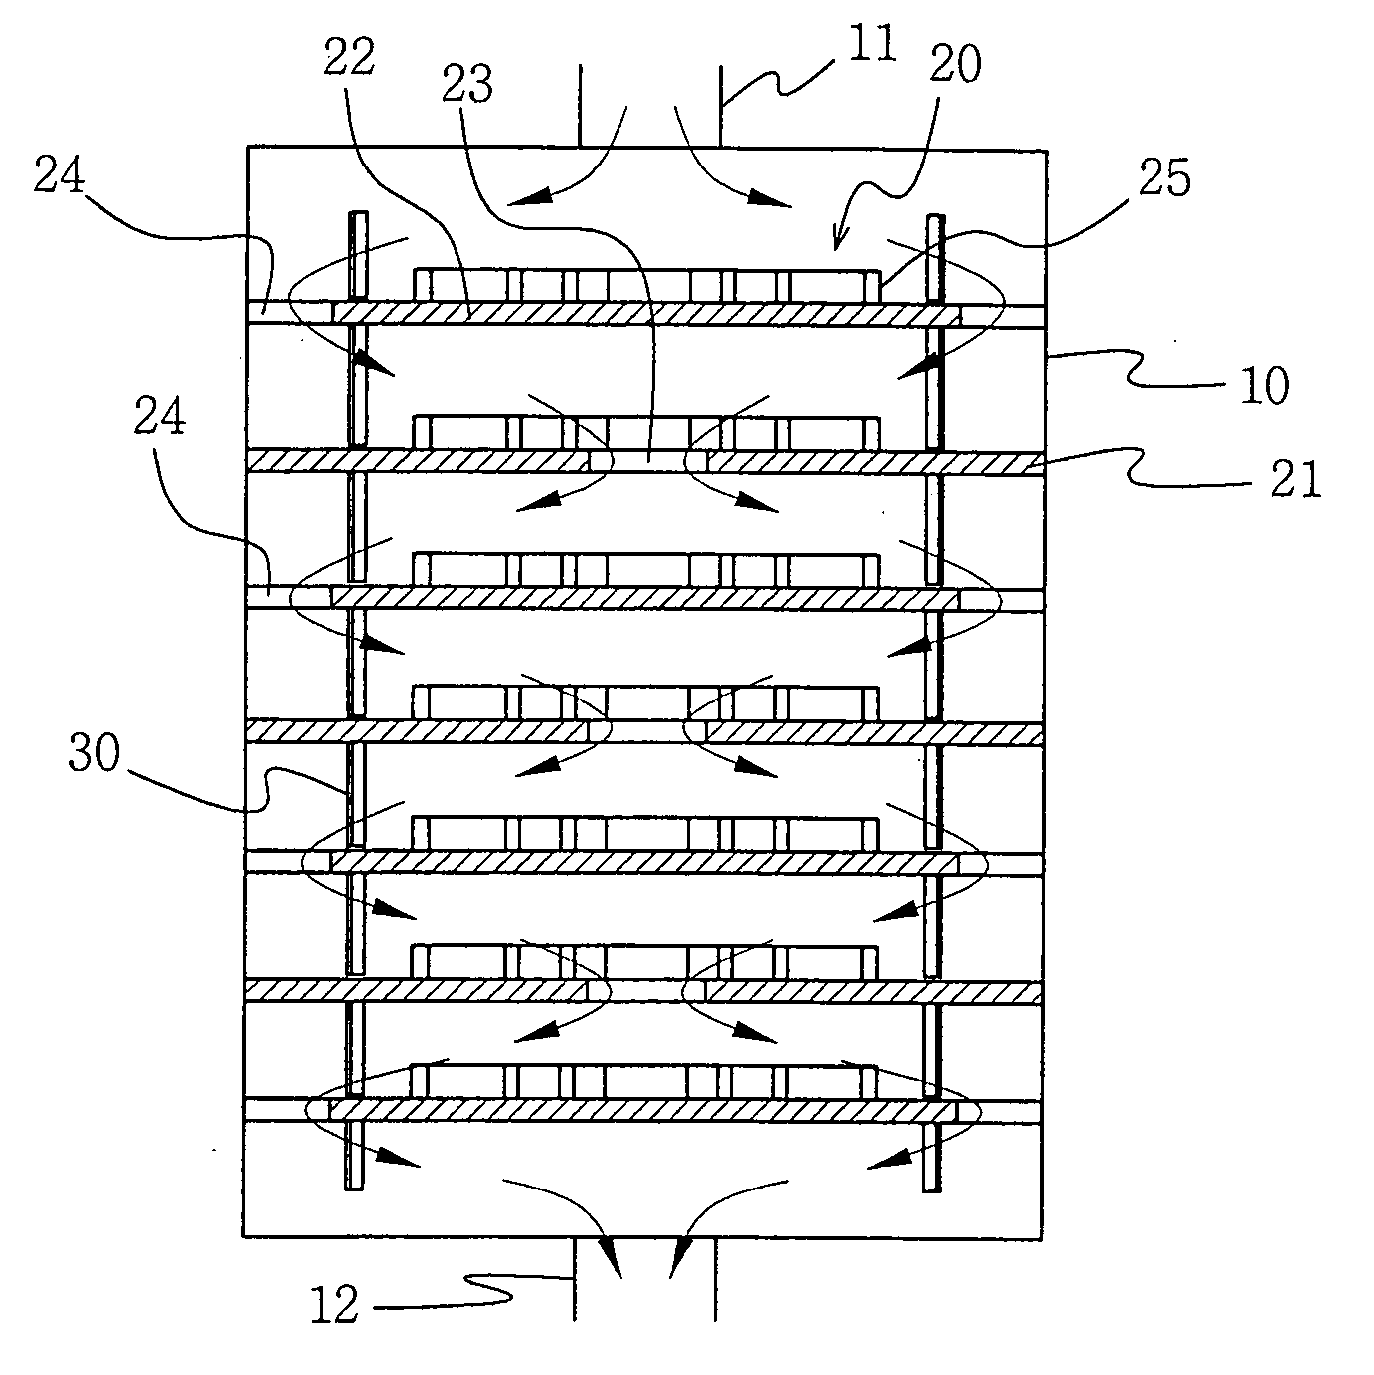 Apparatus for trapping residual products in semiconductor device fabrication equipment